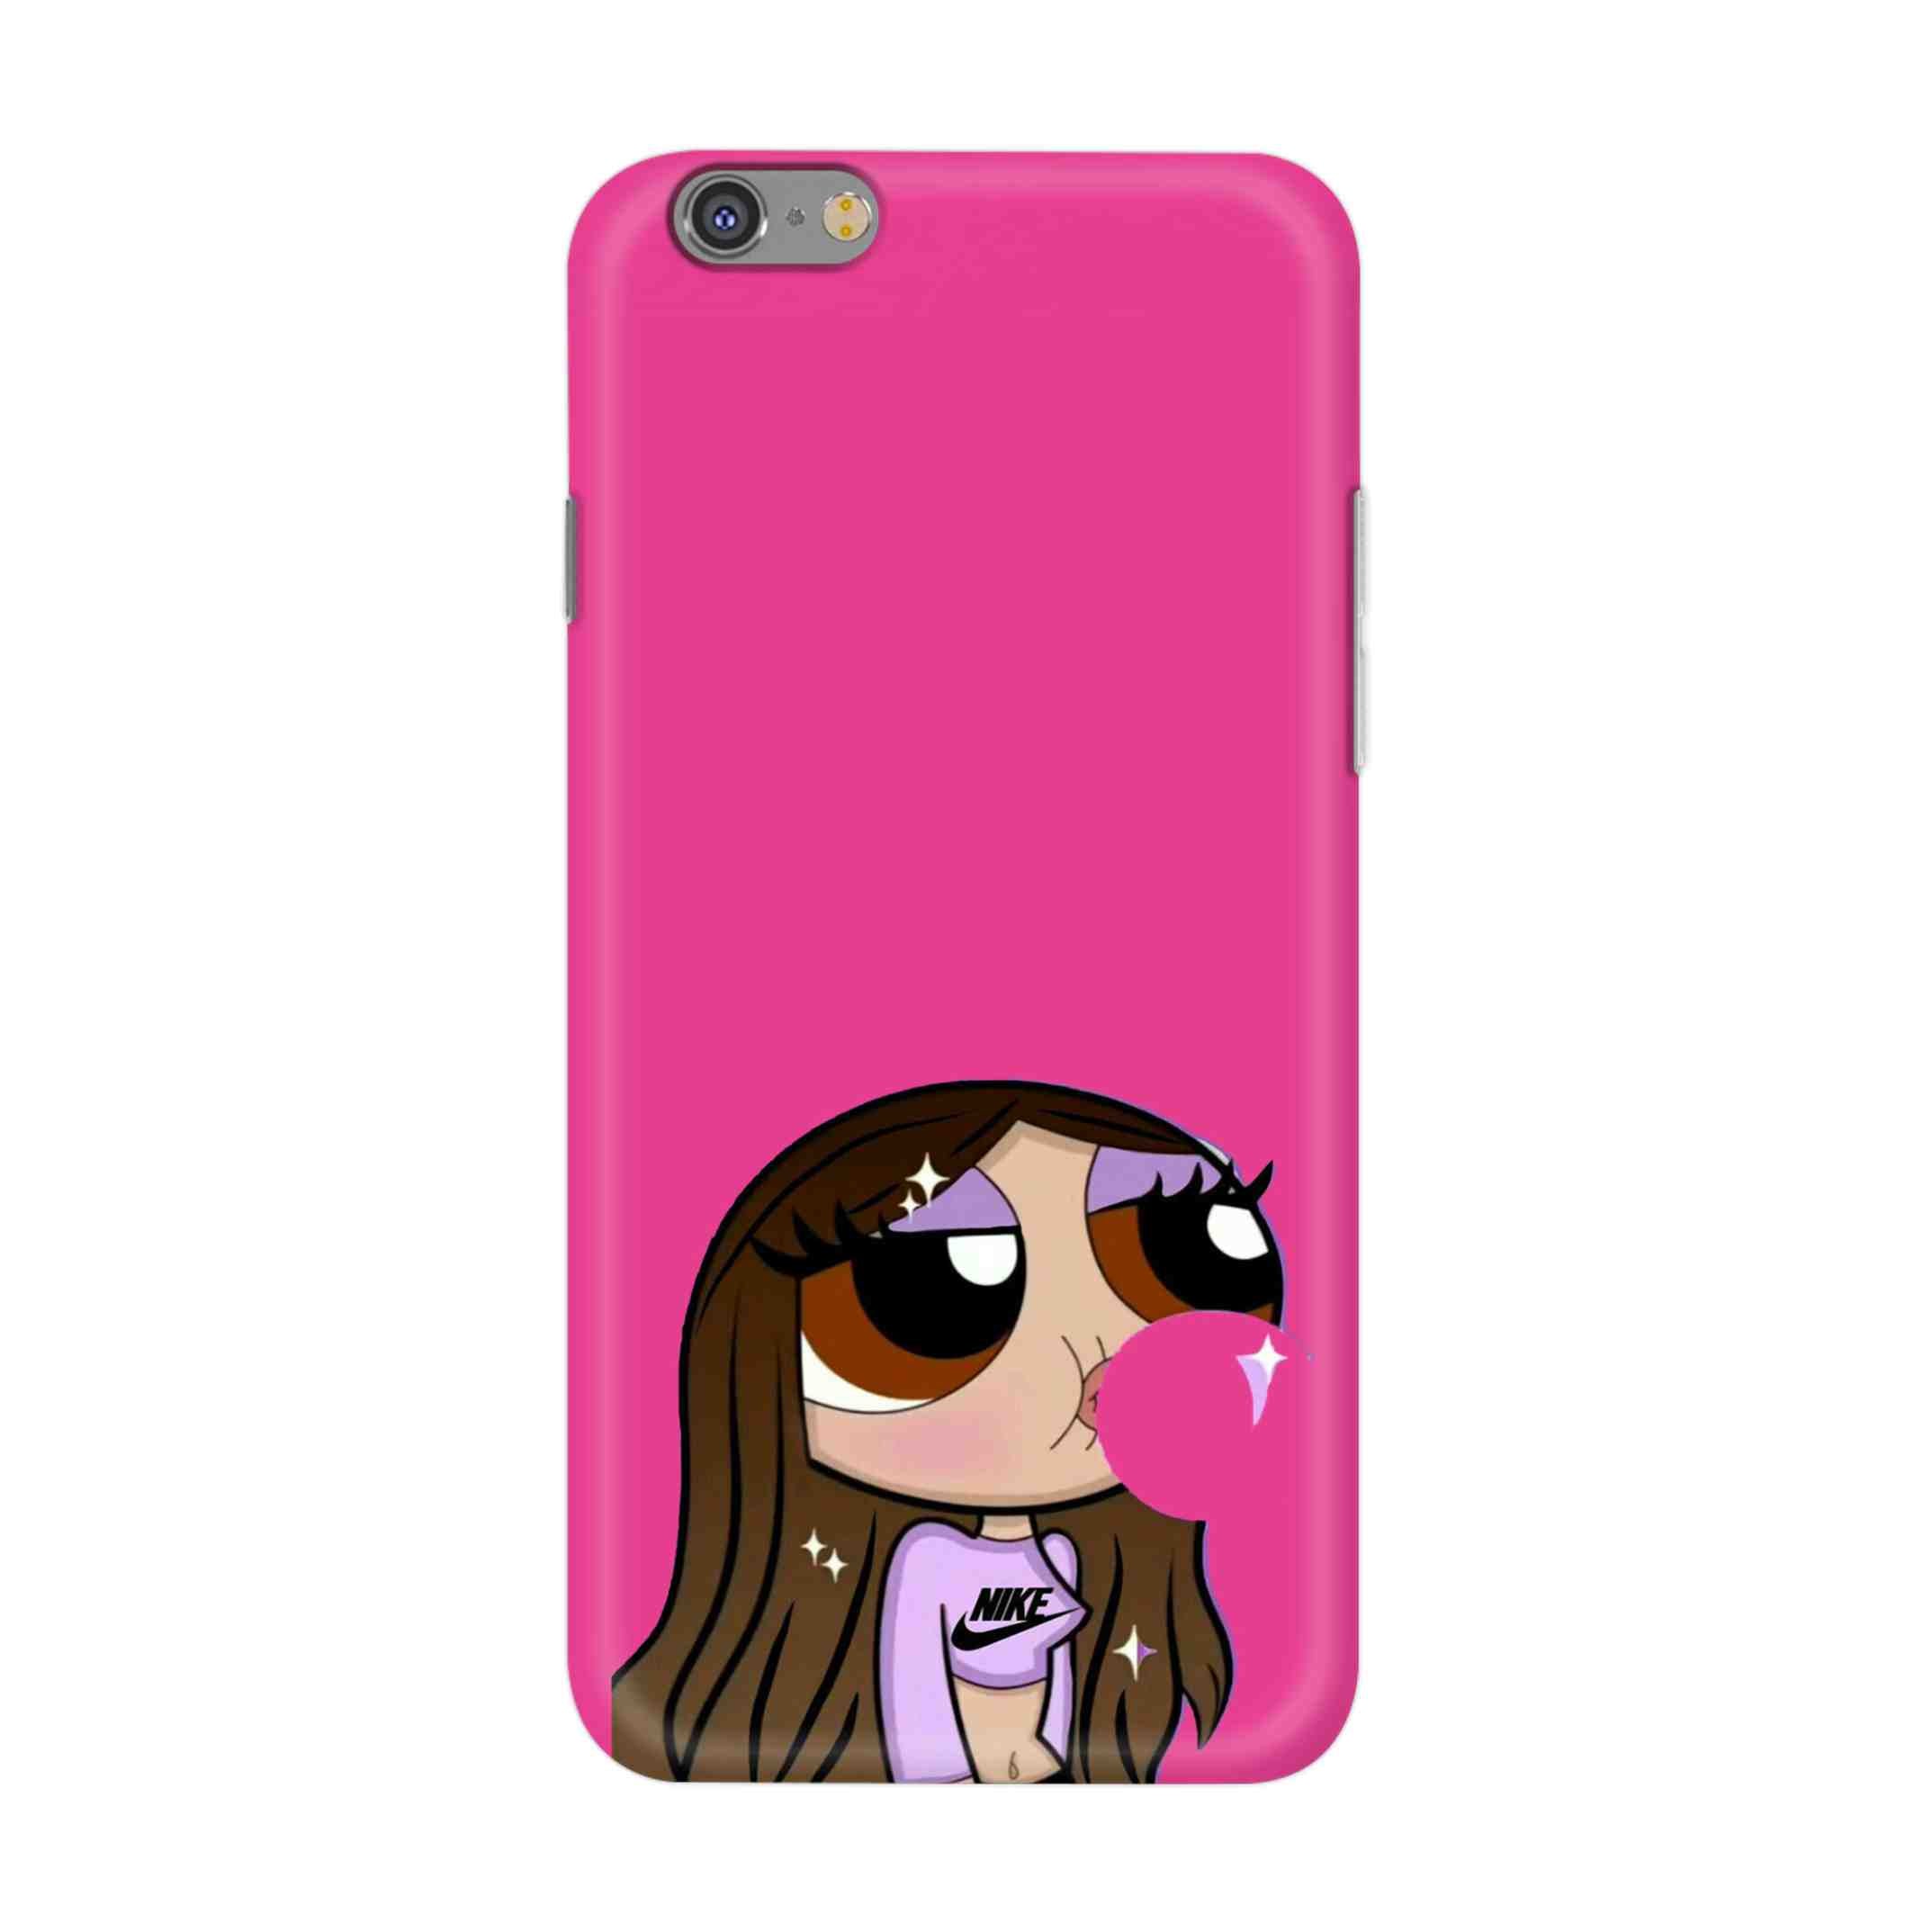 Buy Bubble Girl Hard Back Mobile Phone Case/Cover For iPhone 6 Plus / 6s Plus Online